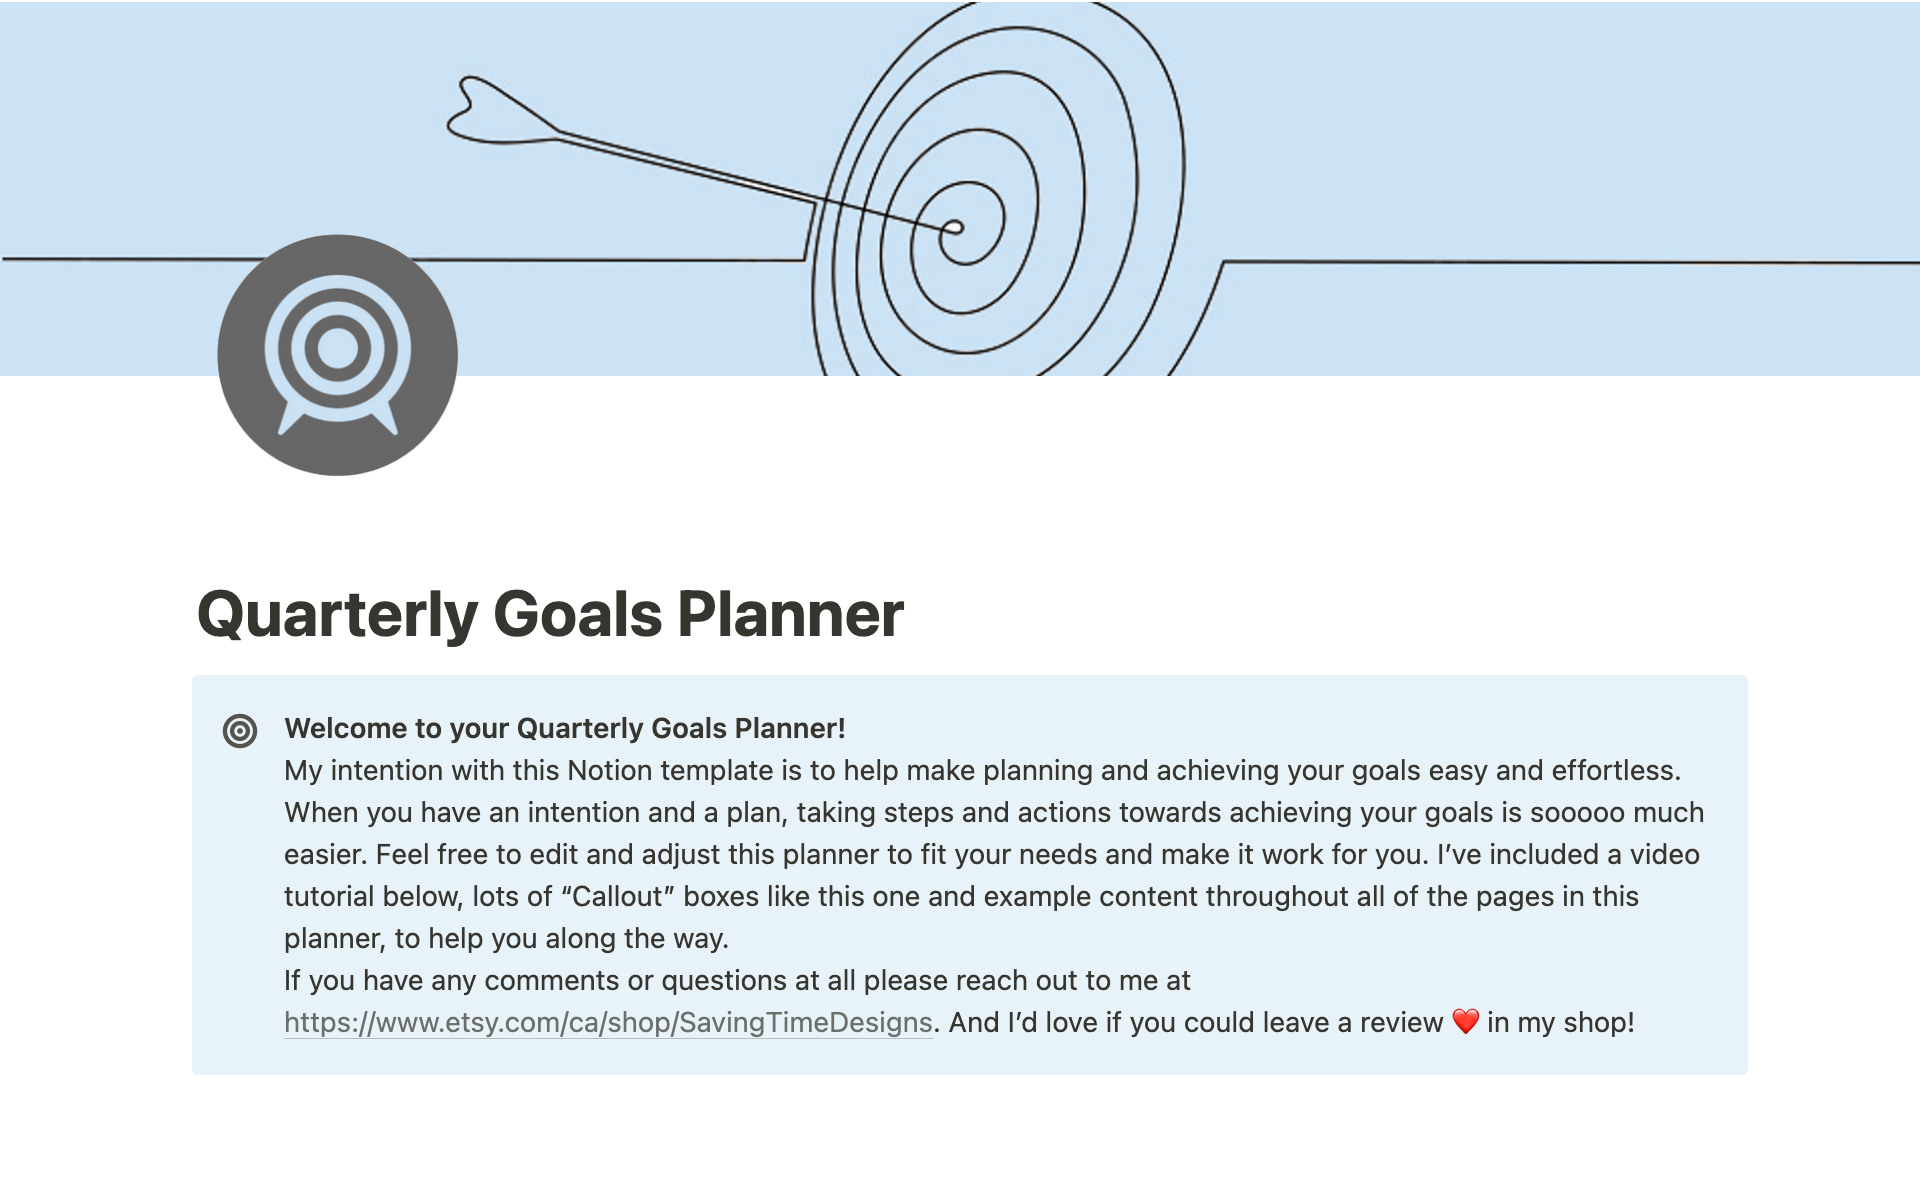 Outlines a three step process to guide users through planning and achieving their quarterly goals.